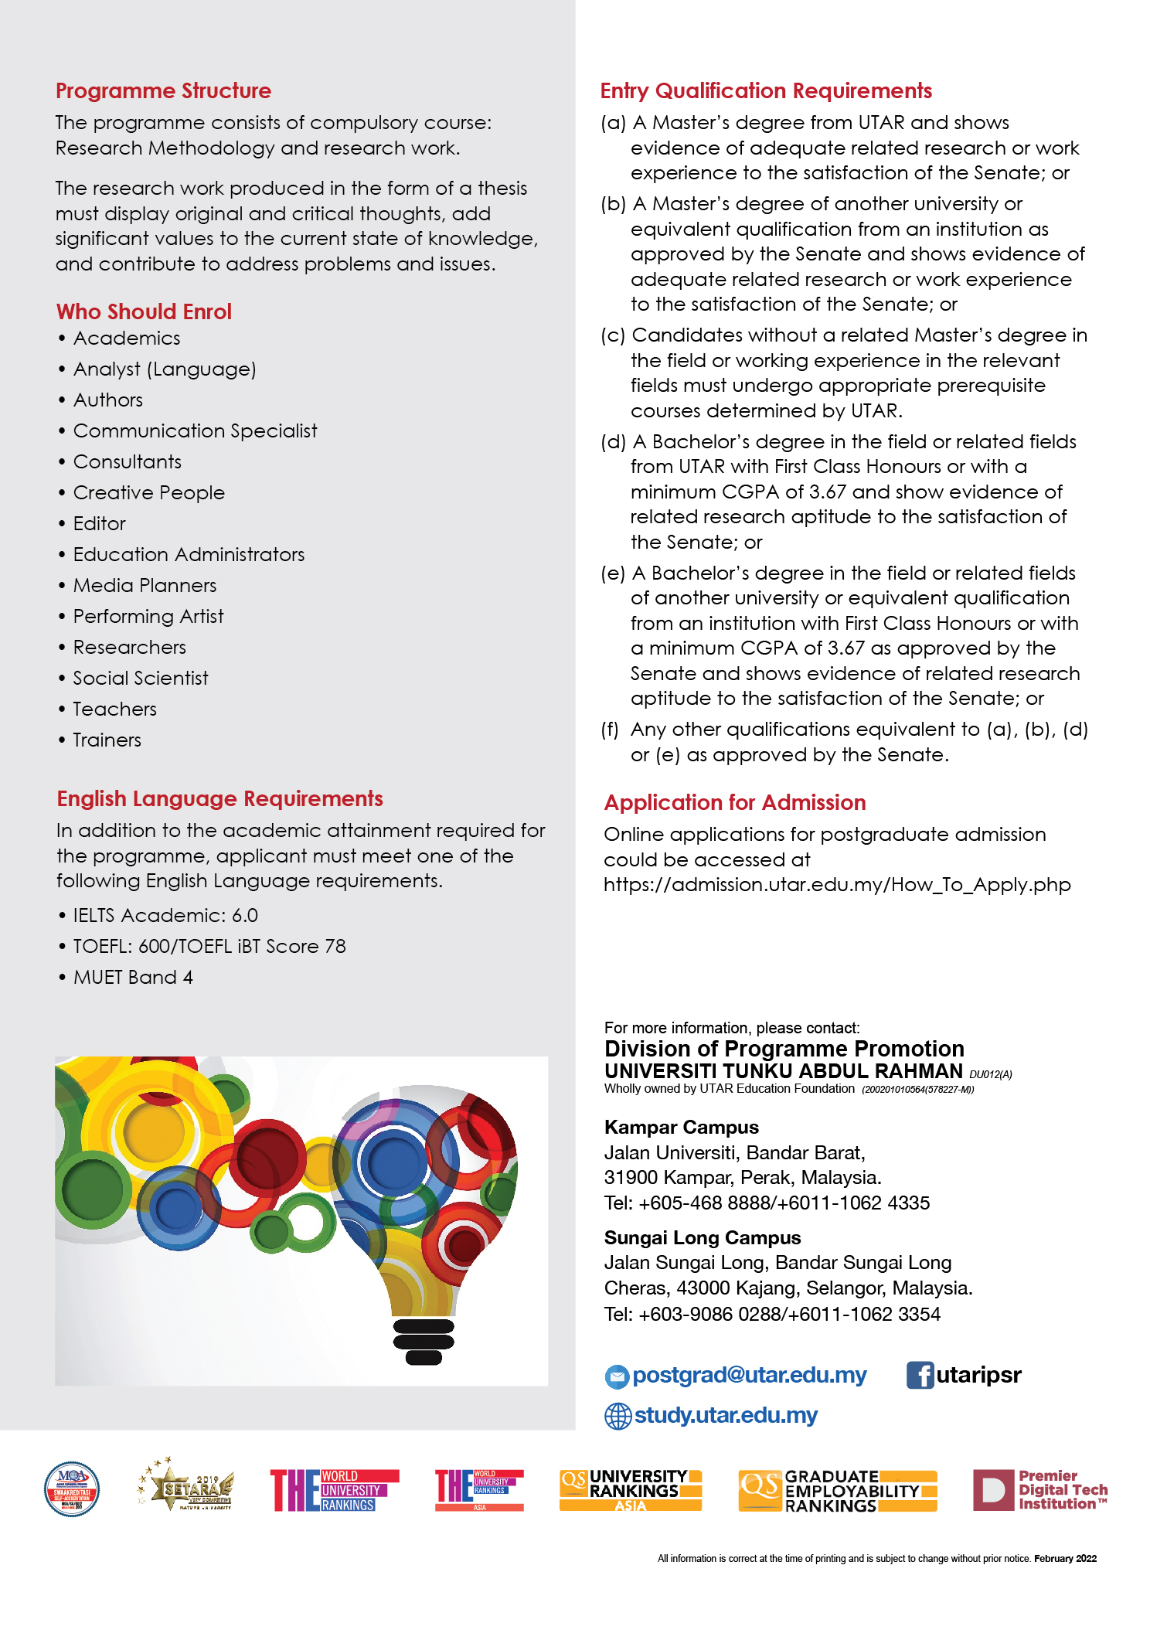 PhD degree in Creative Arts flyer page 2